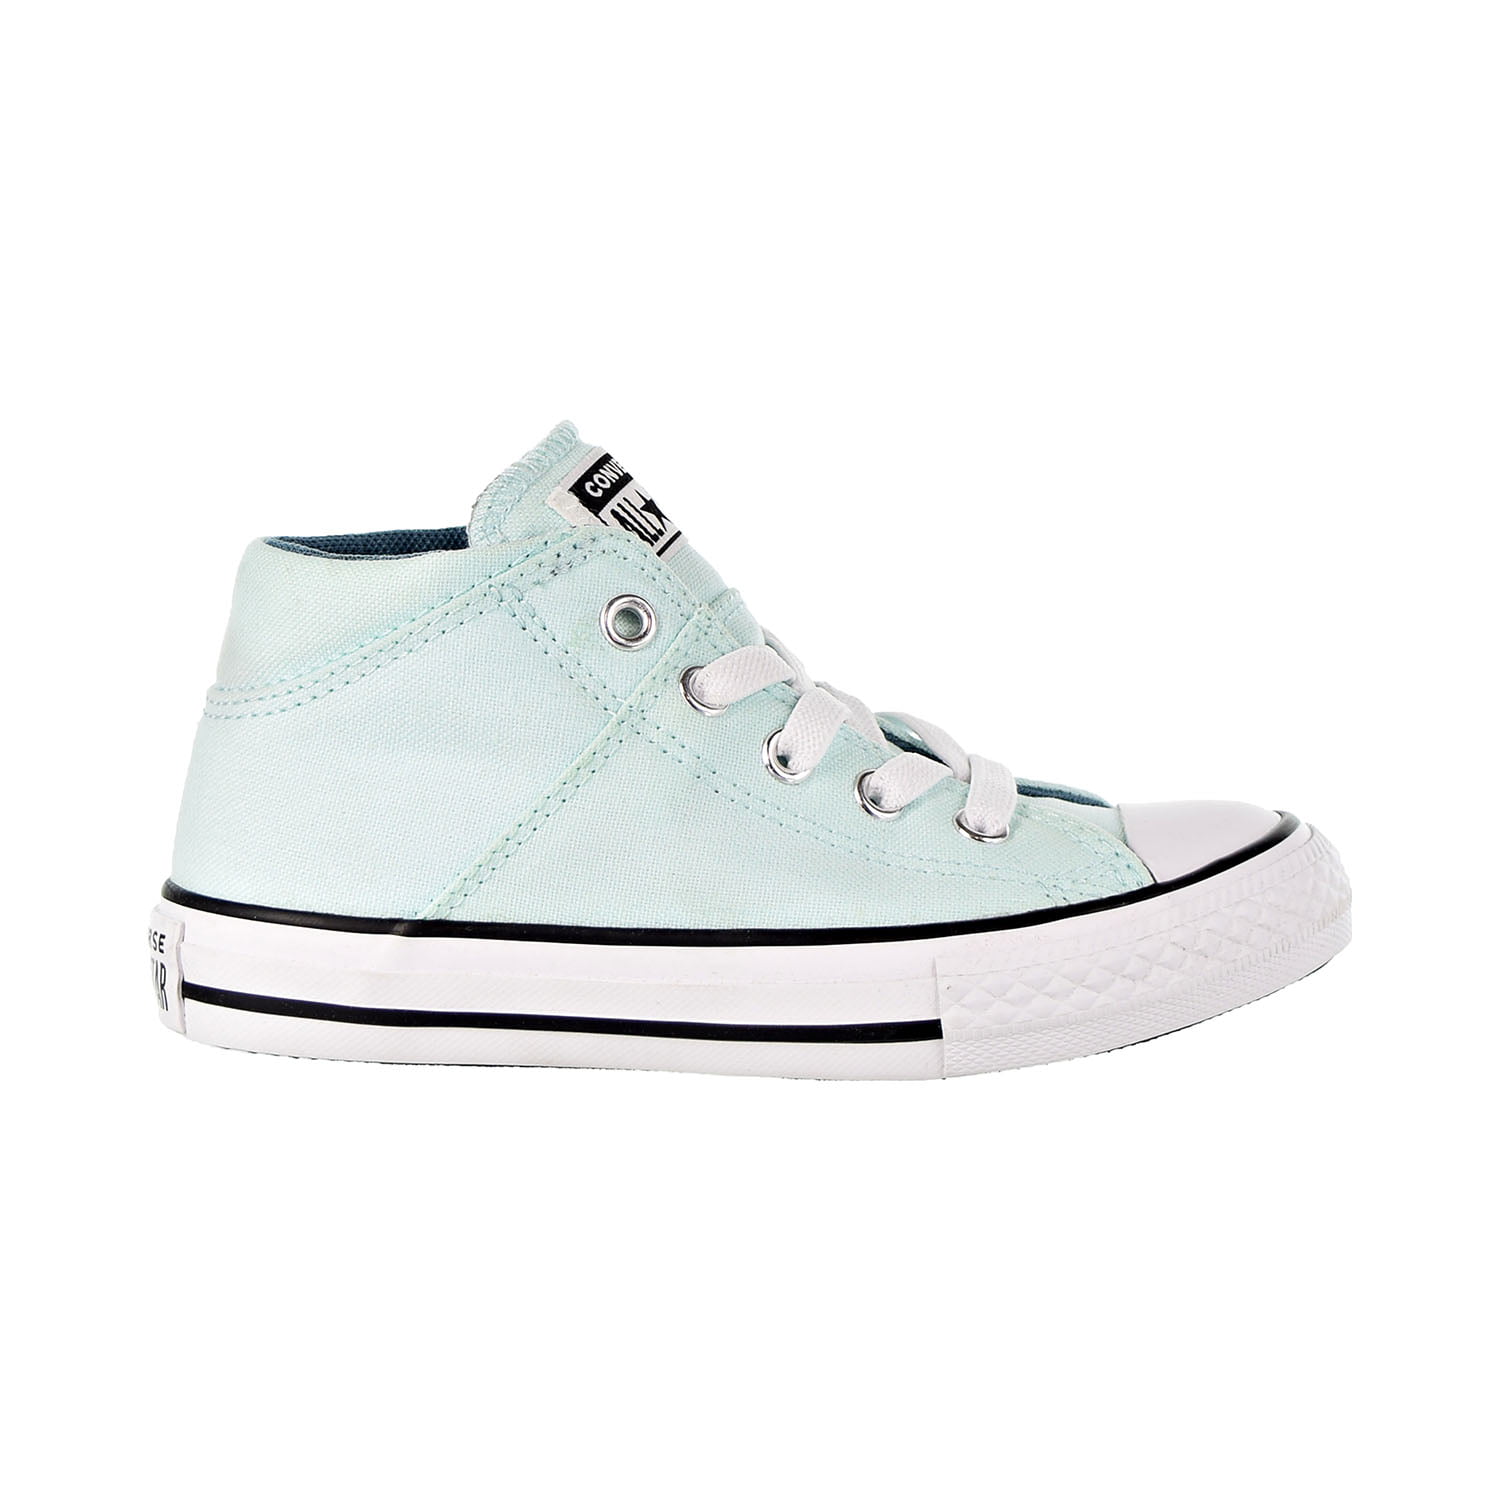 Chuck Taylor All Star Madison Mid Kids Shoes Teal Tint/Celestial Teal/White 663668f